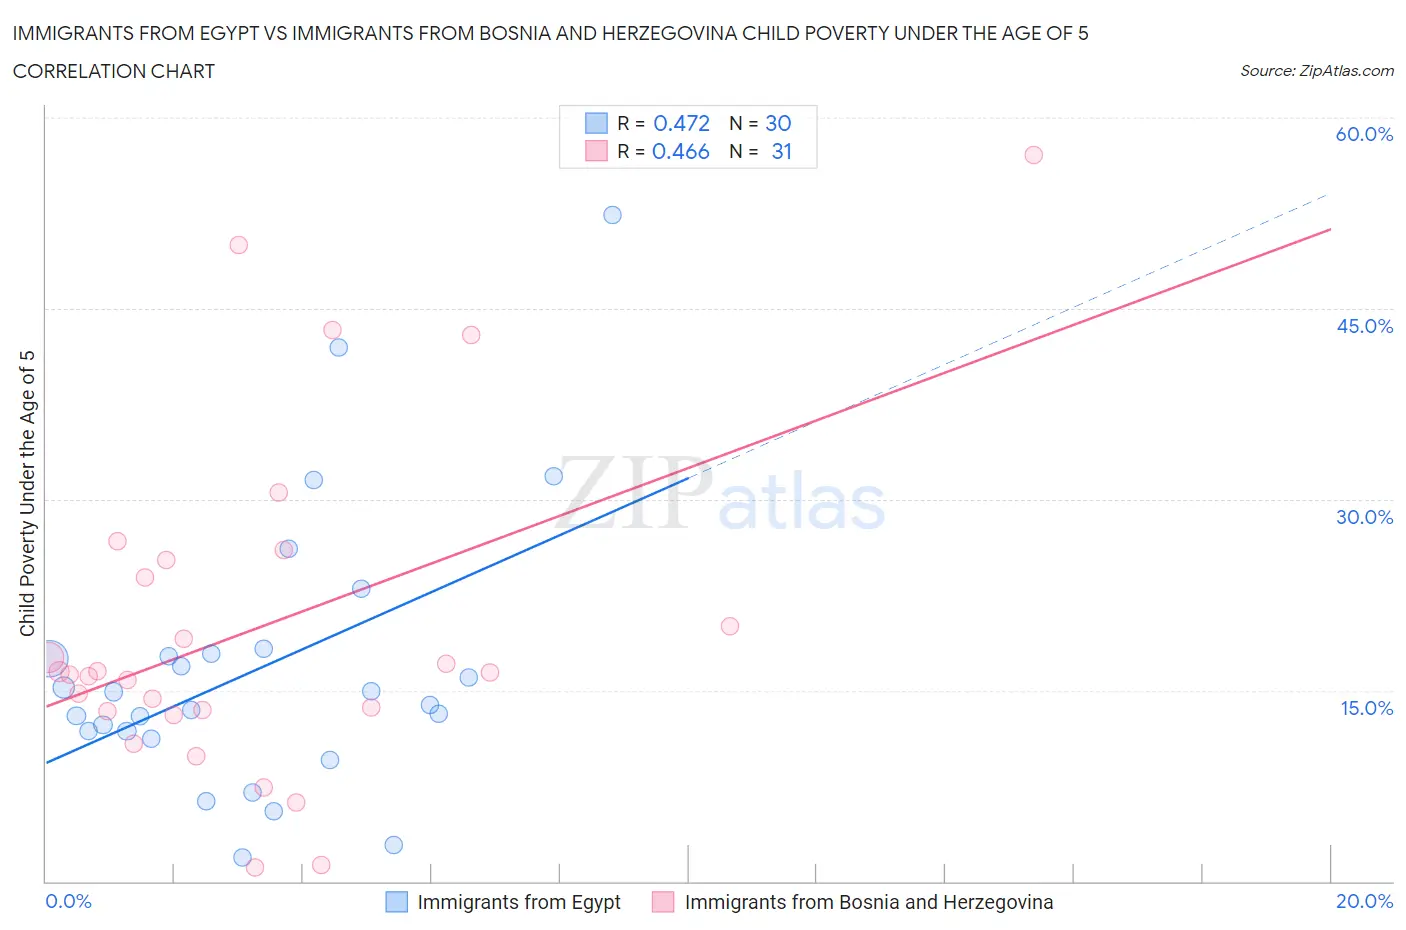 Immigrants from Egypt vs Immigrants from Bosnia and Herzegovina Child Poverty Under the Age of 5